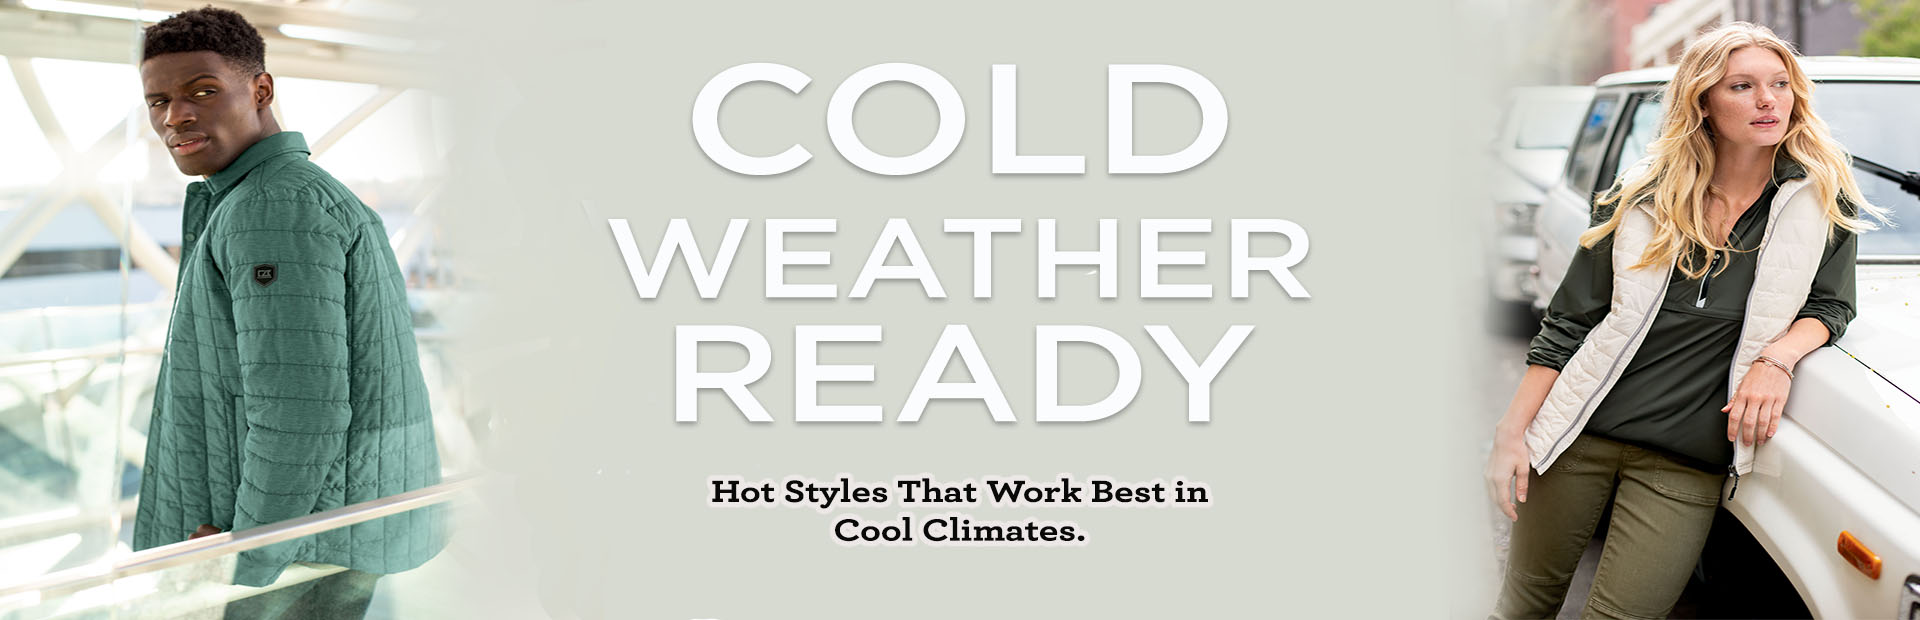 cold weather ready hot styles that work best in cool climates 